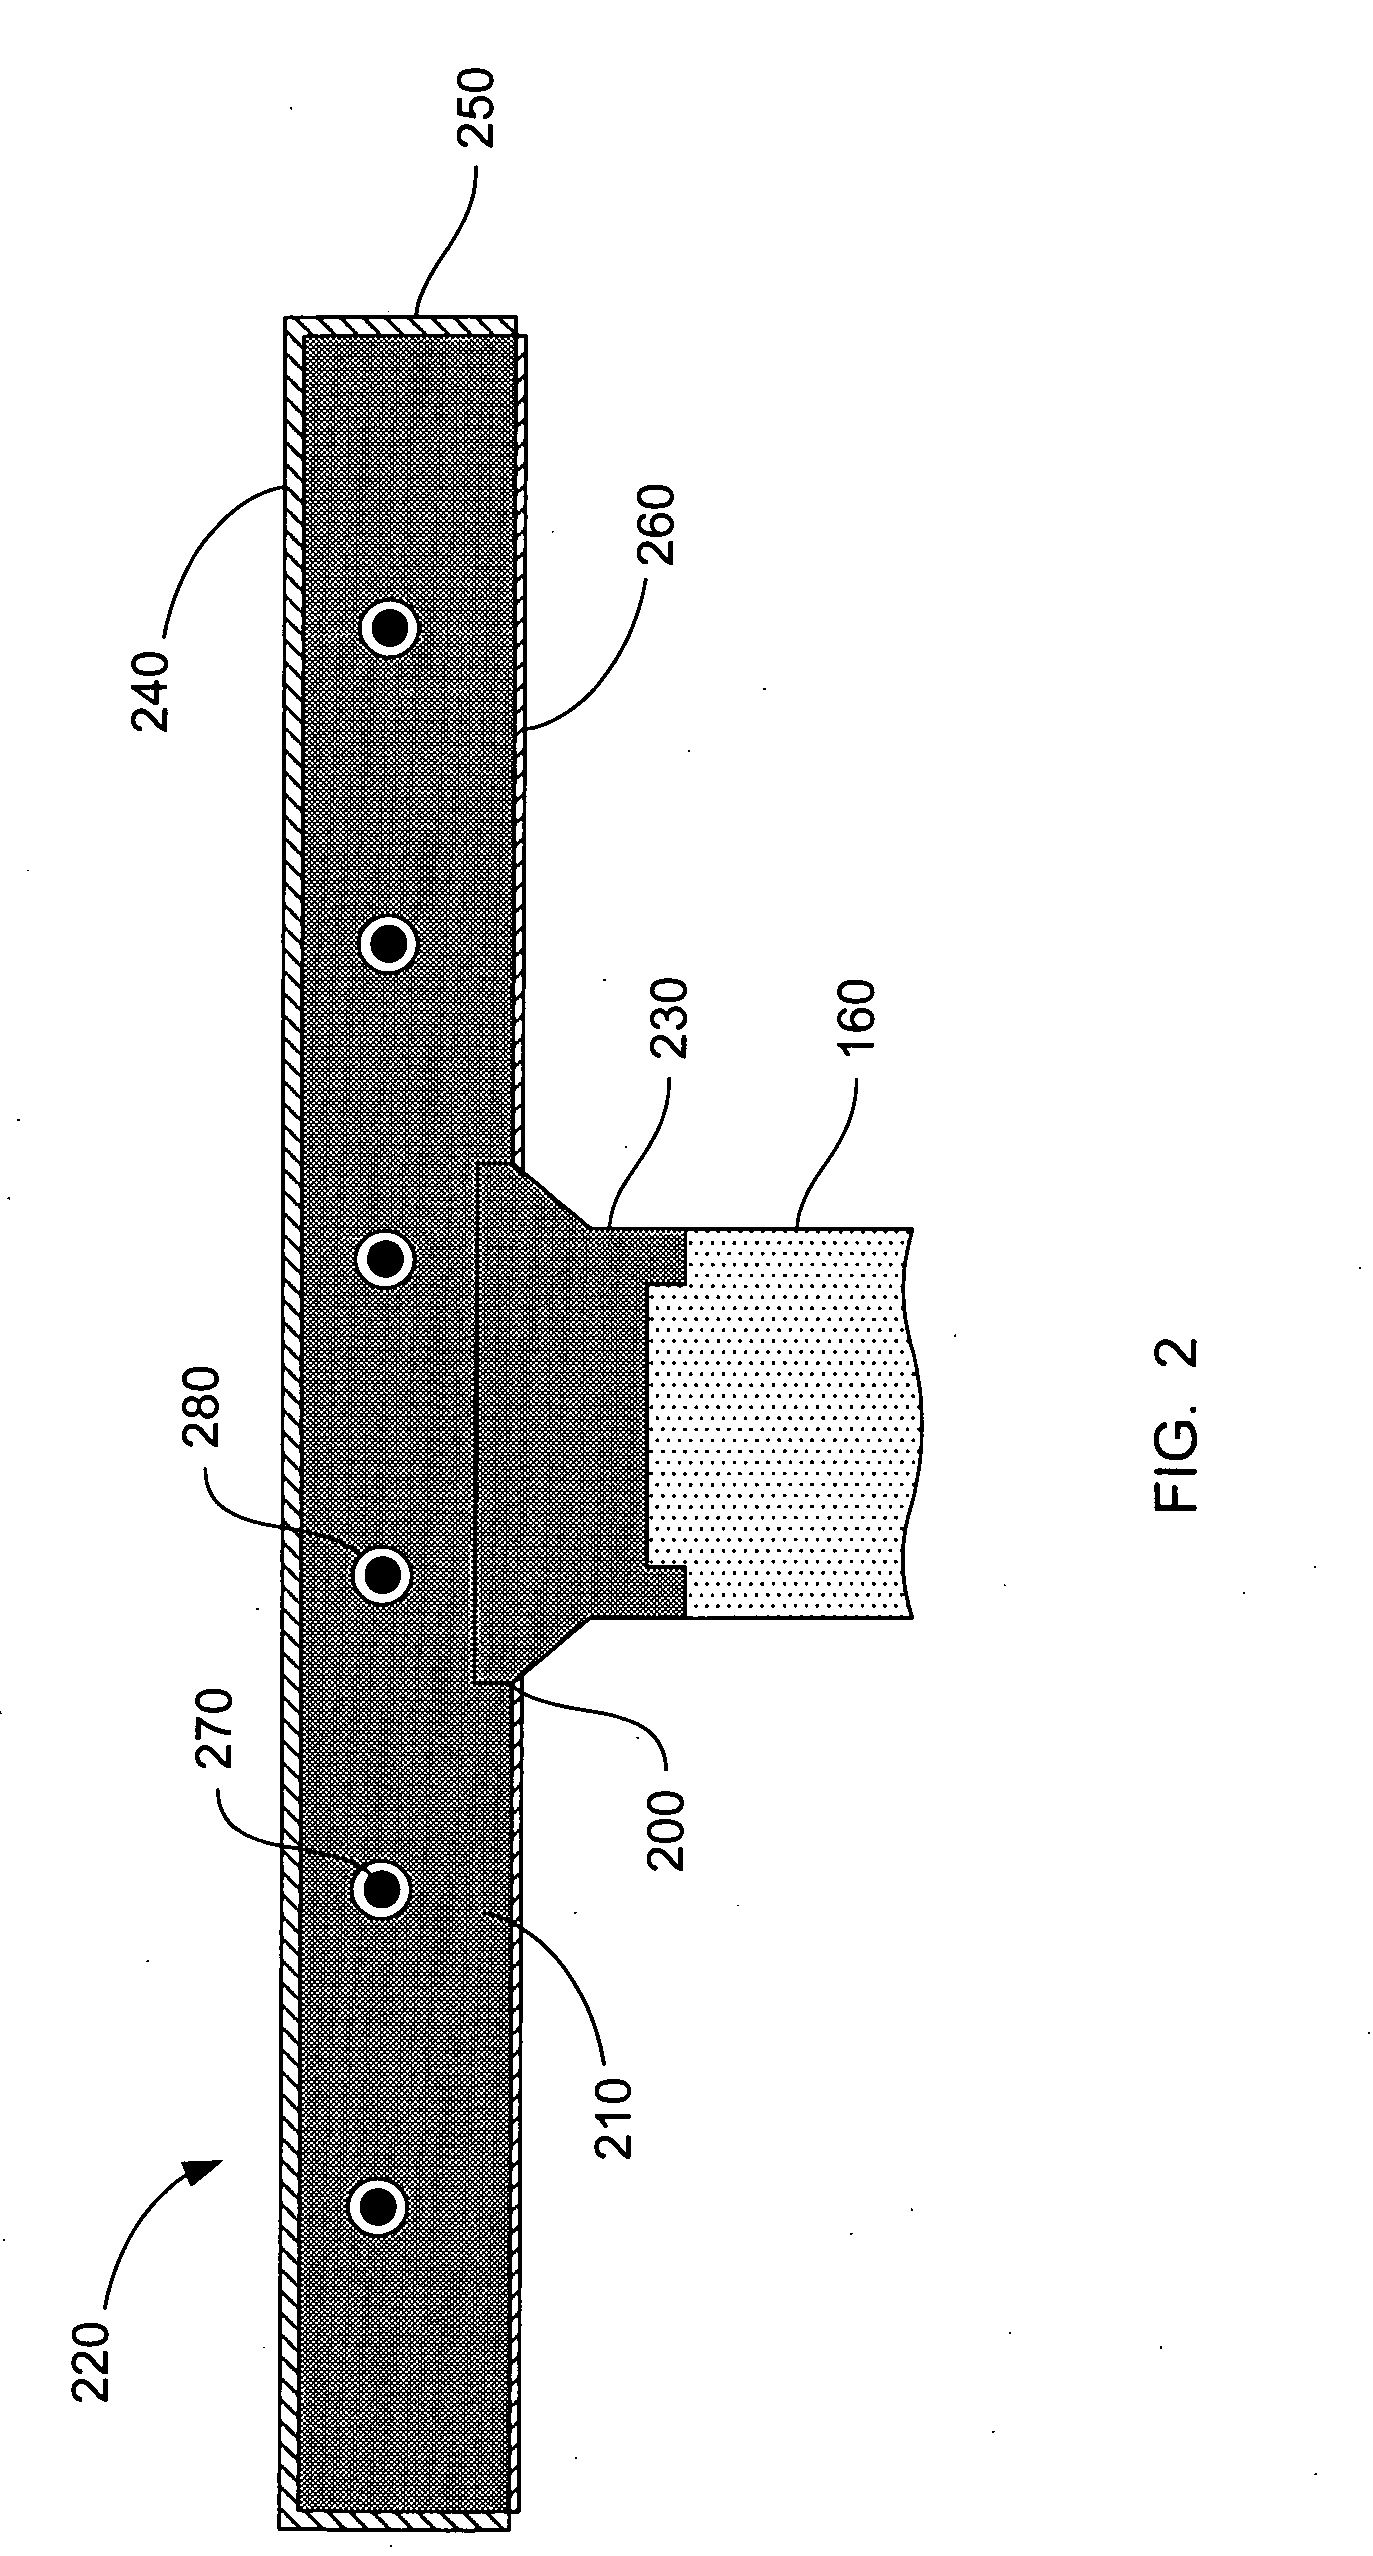 Advanced ceramic heater for substrate processing